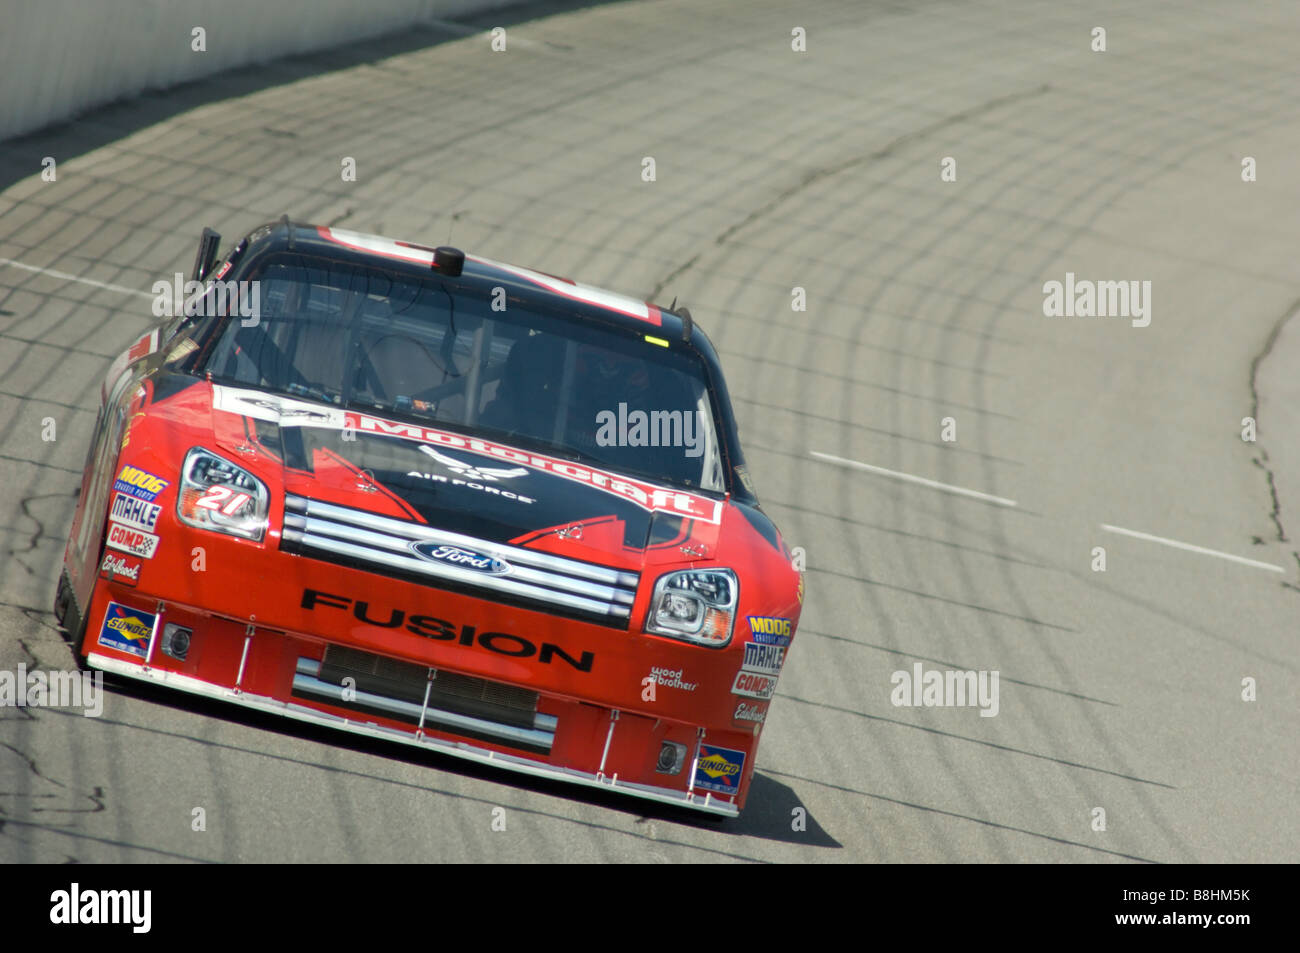 Bill Elliot races the Motorcraft Ford Fusion in the LifeLock 400 at Michigan International Speedway, 2008. Stock Photo